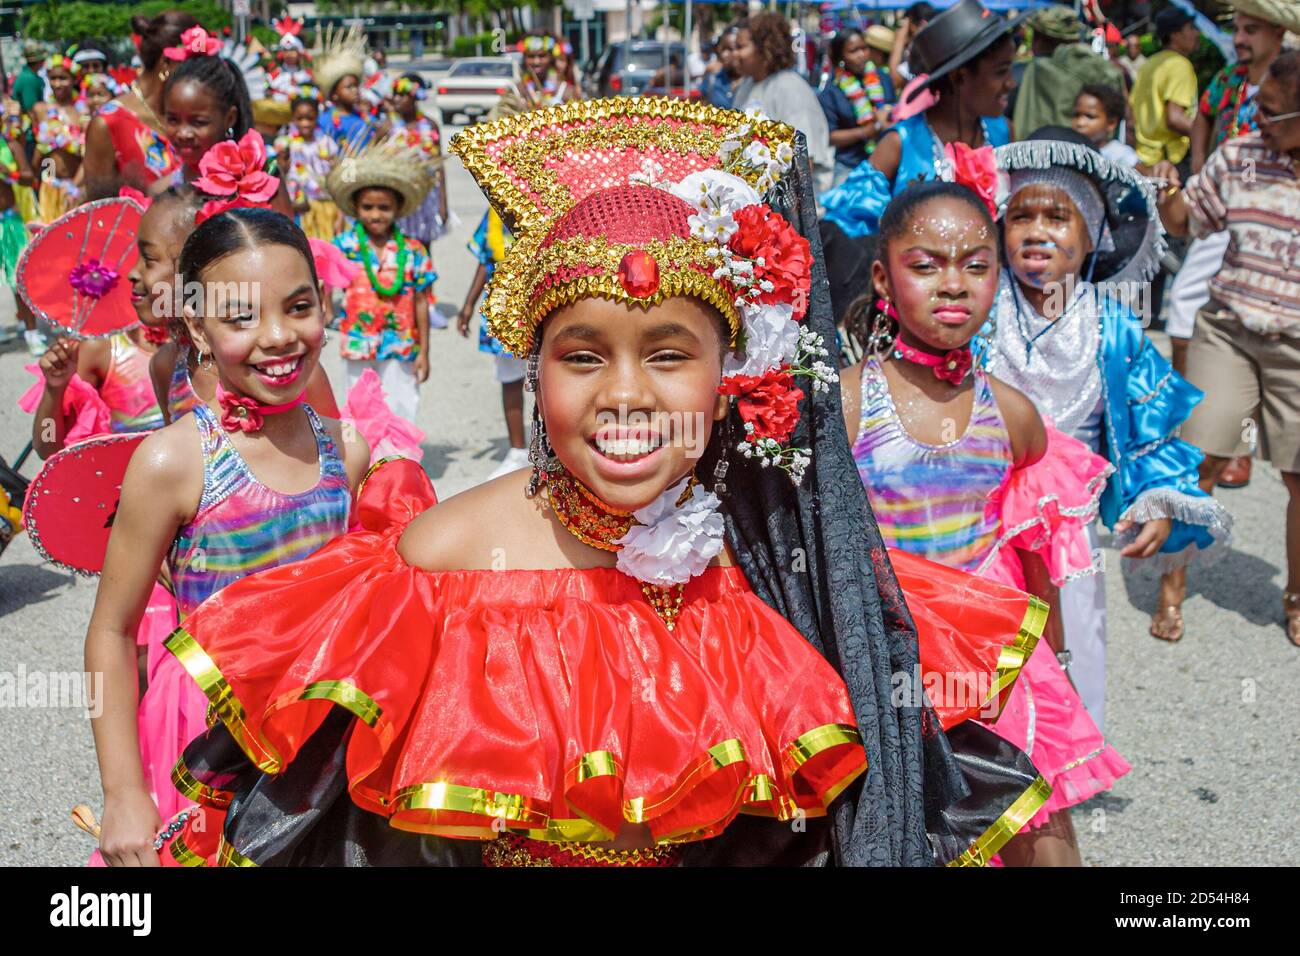 Florida Ft. Fort Lauderdale Caribbean Mardi Gras Junior Carnival,hand crafted handmade parade costumes costume outfit outfits,girl girls wear weating Stock Photo